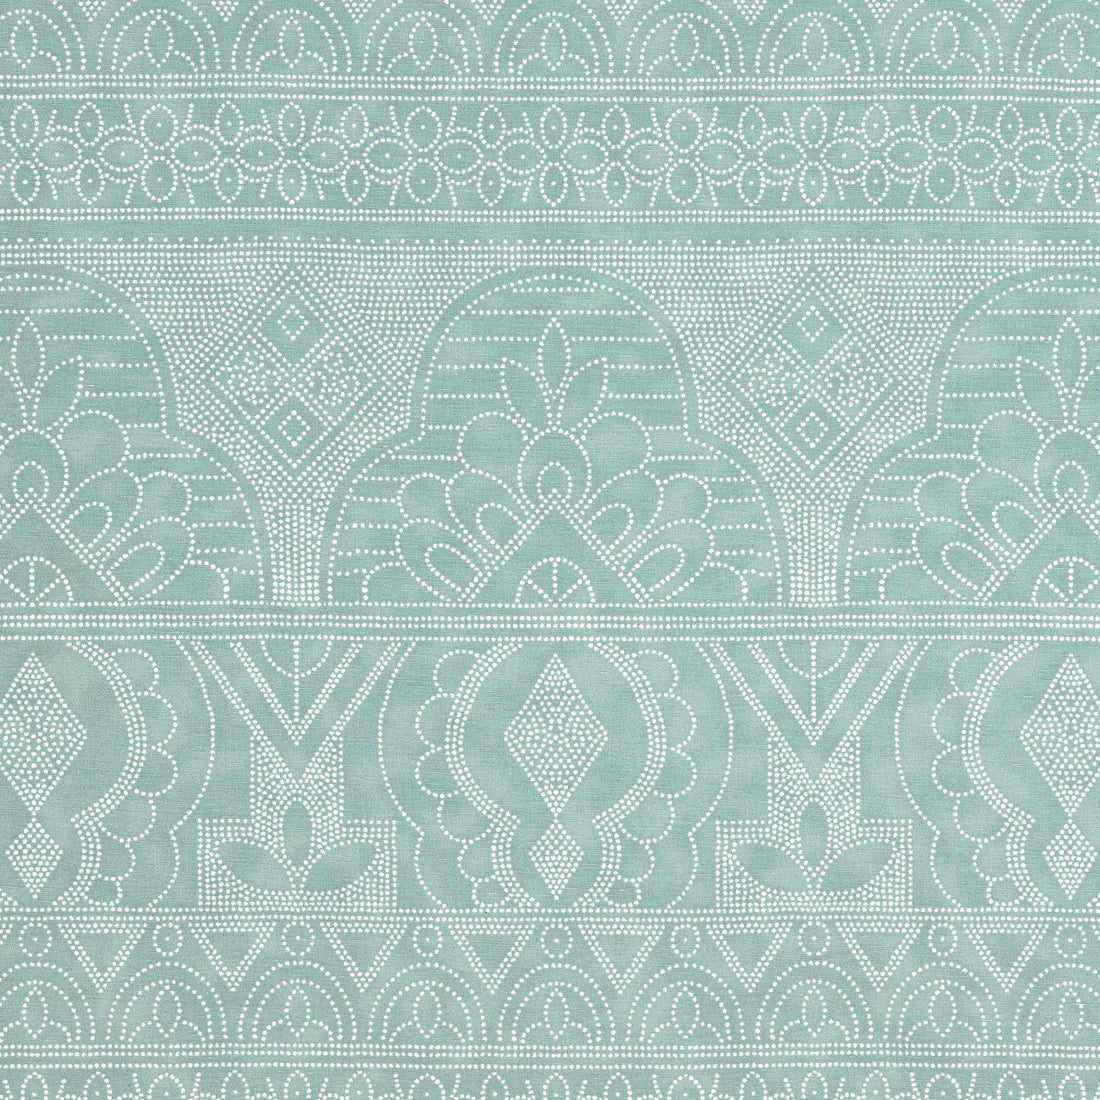 Medinas fabric in seaglass color - pattern number F981300 - by Thibaut in the Montecito collection